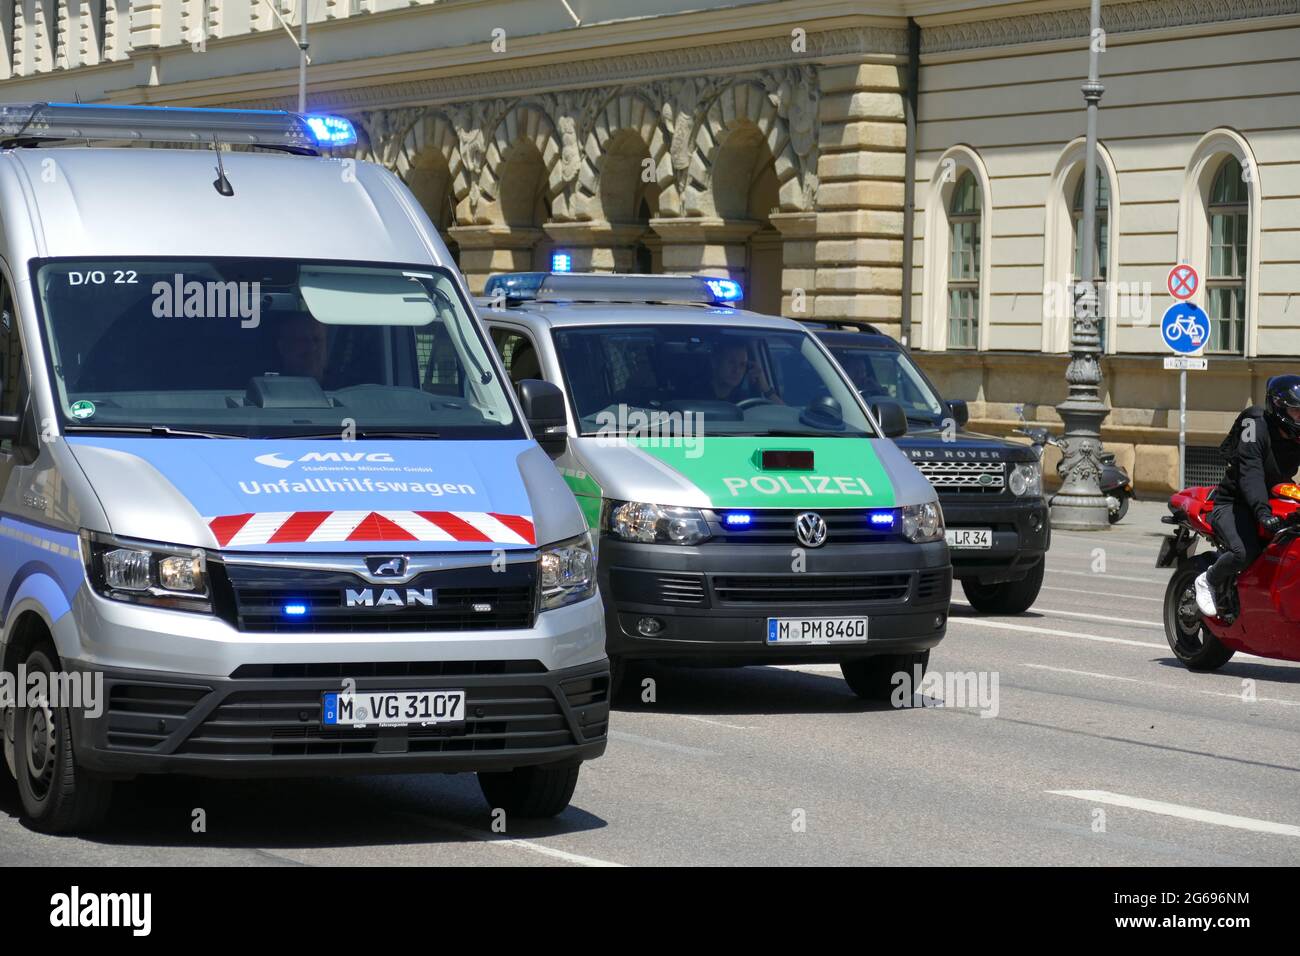 Police van with emergency lights on,HW Car (Technical Emergency Service car) backing an orderly demonstration, germany. Stock Photo